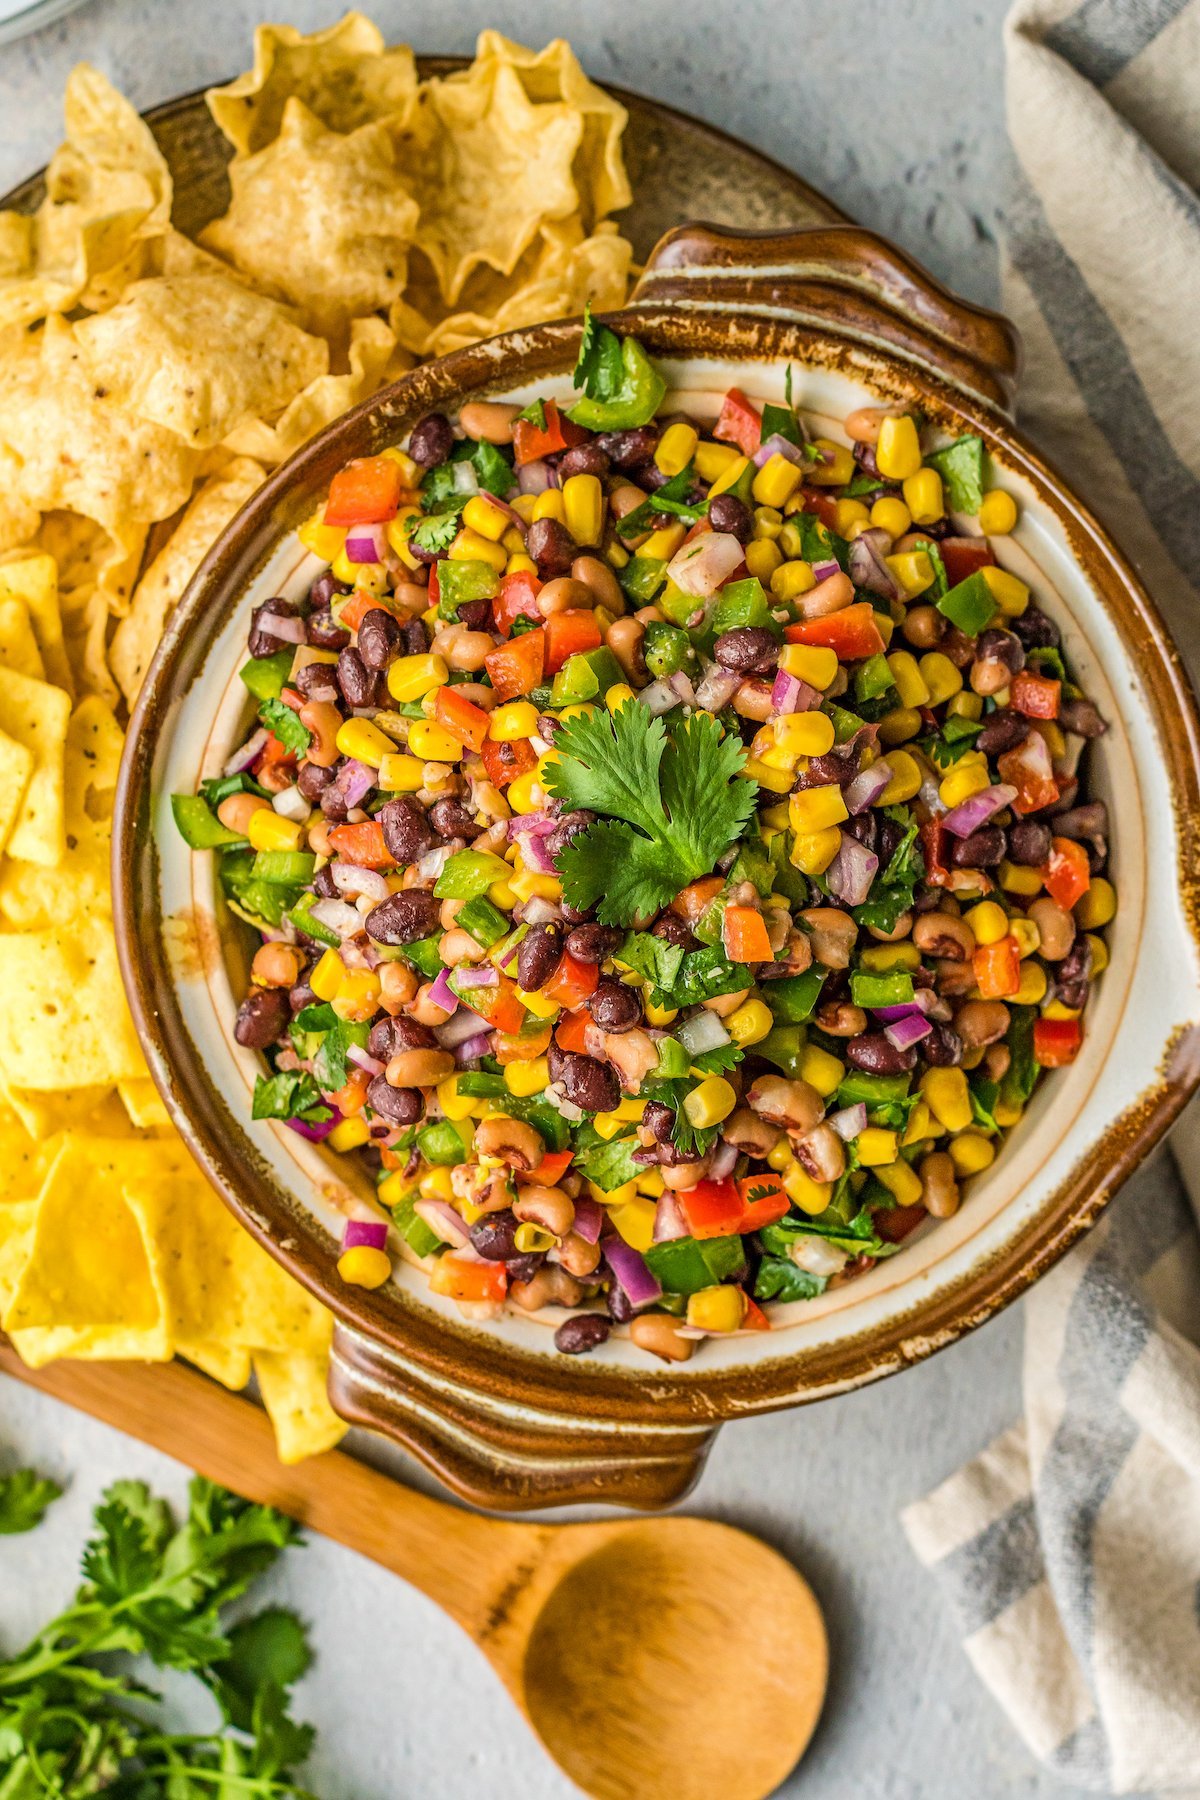 Bowl of Texas caviar with cilantro leaves.